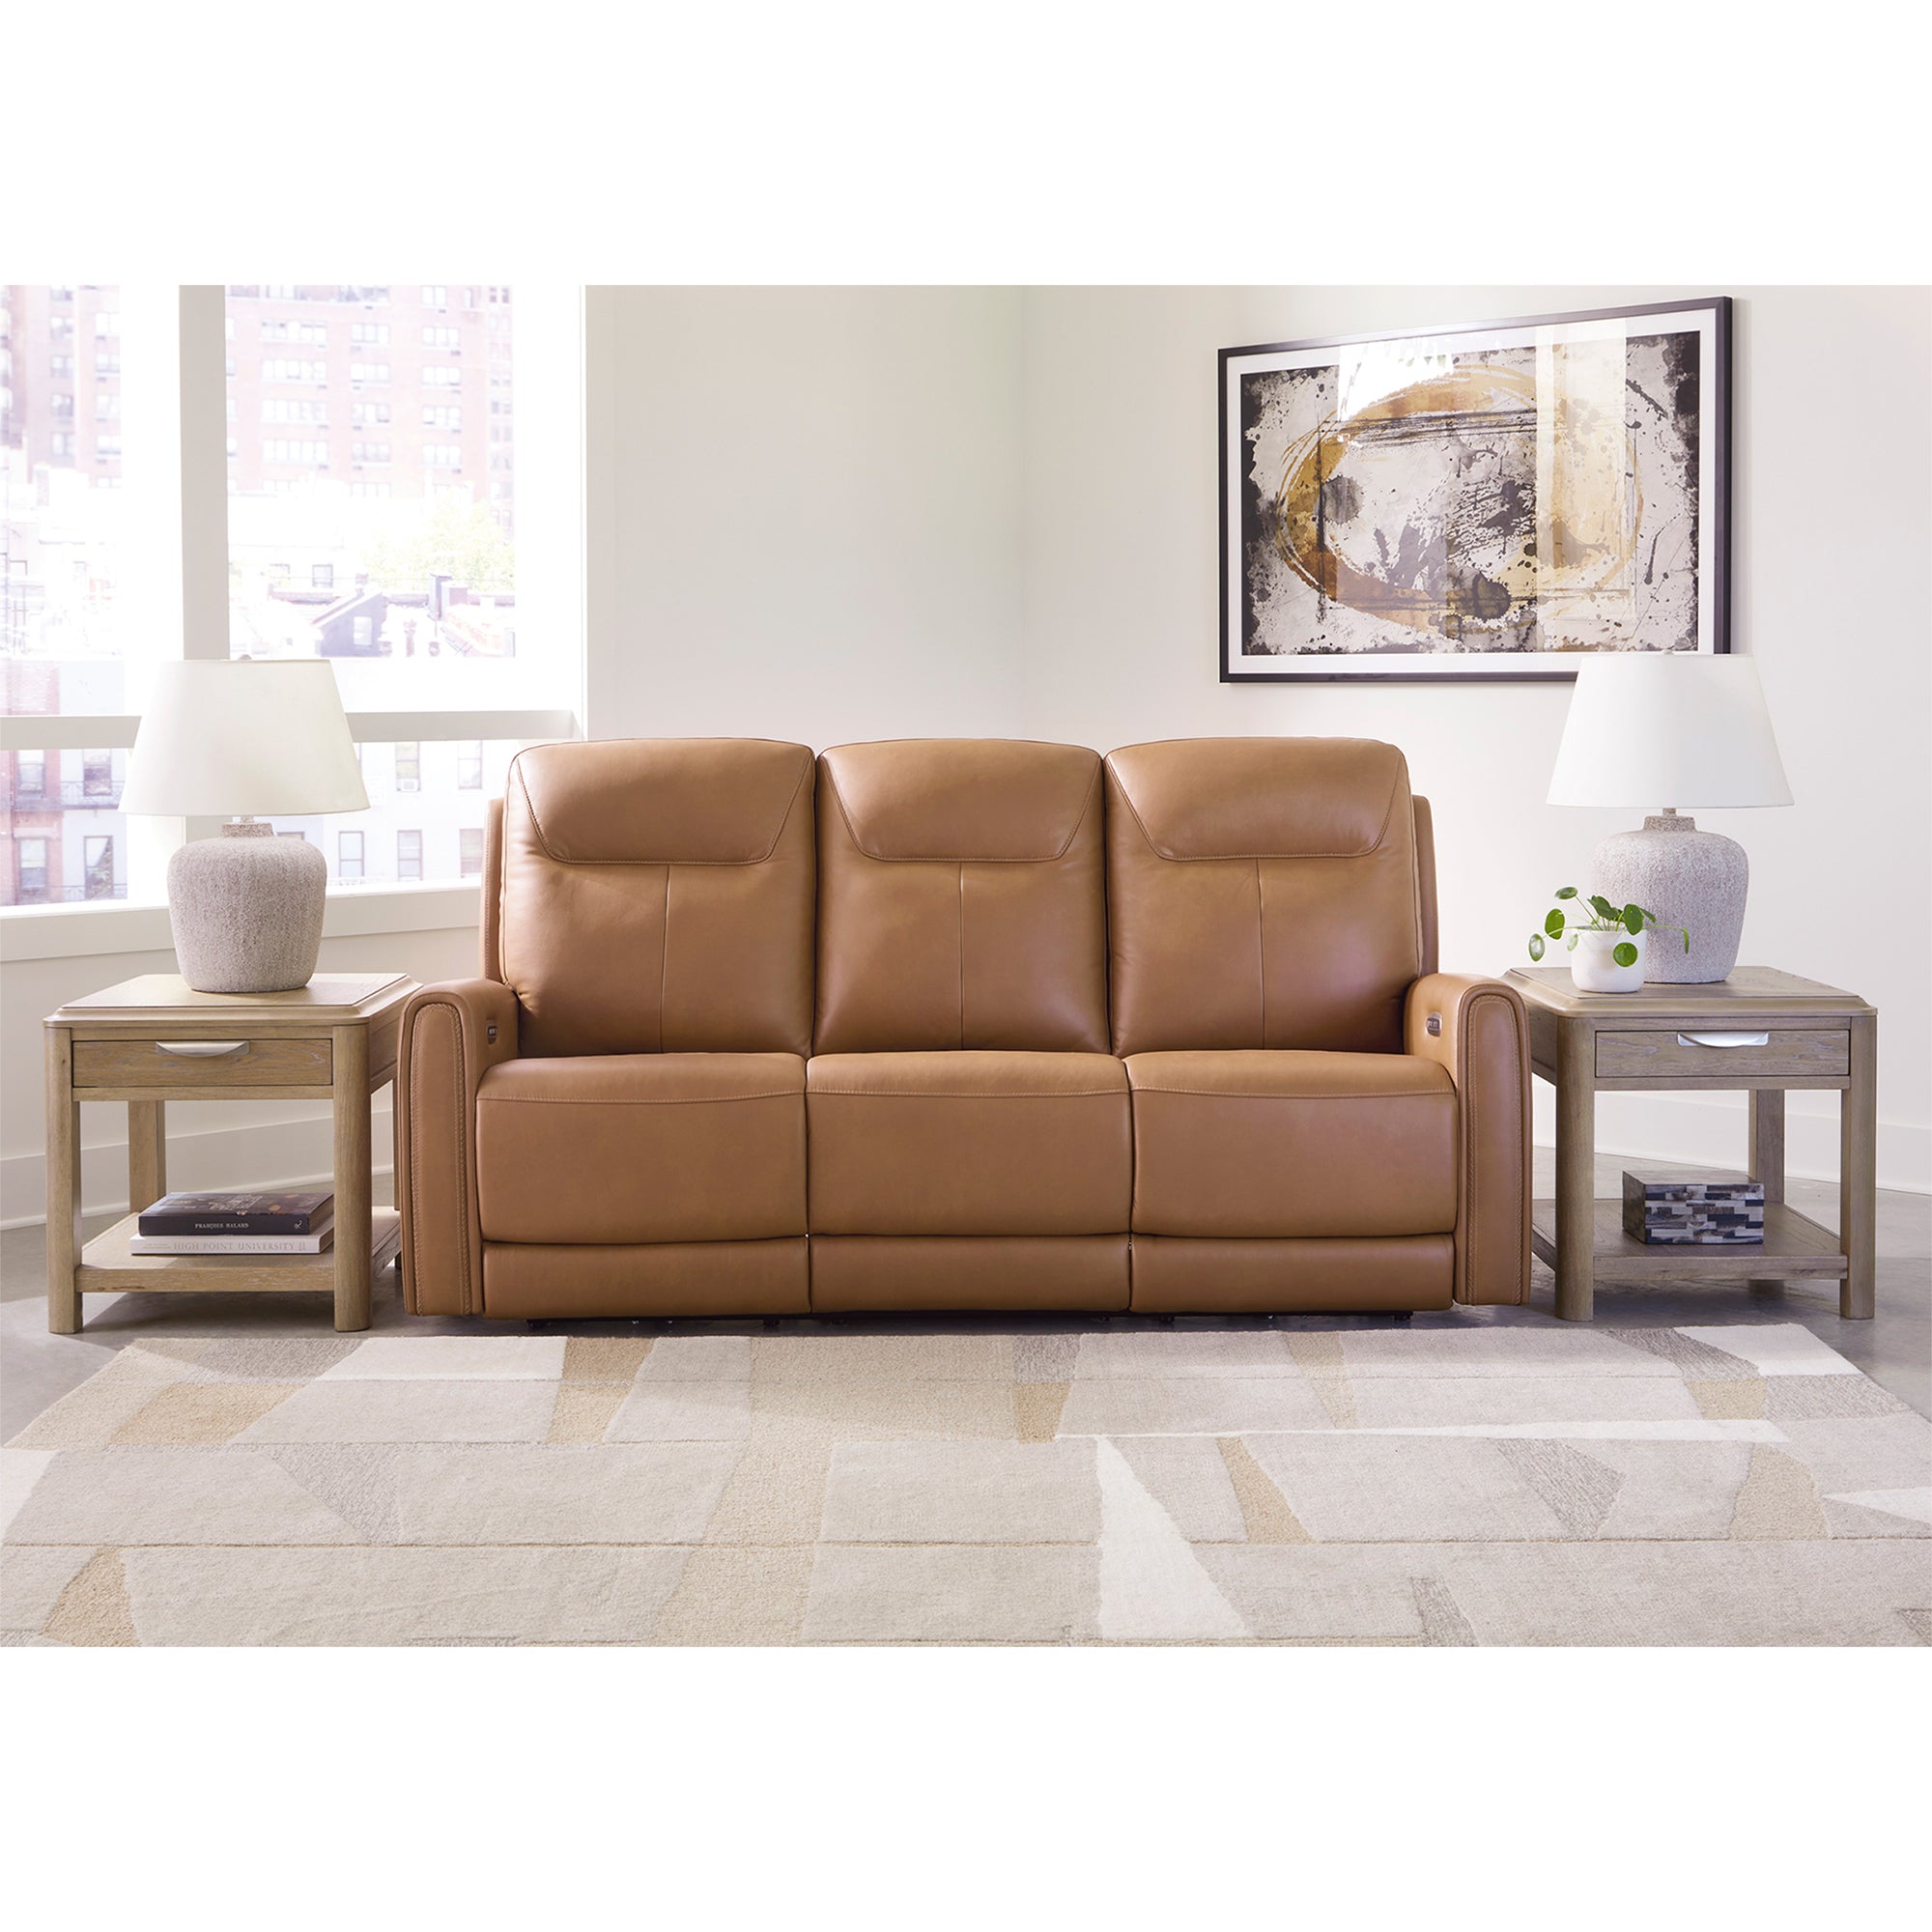 Tryanny Triple Power Leather Reclining Sofa and Loveseat